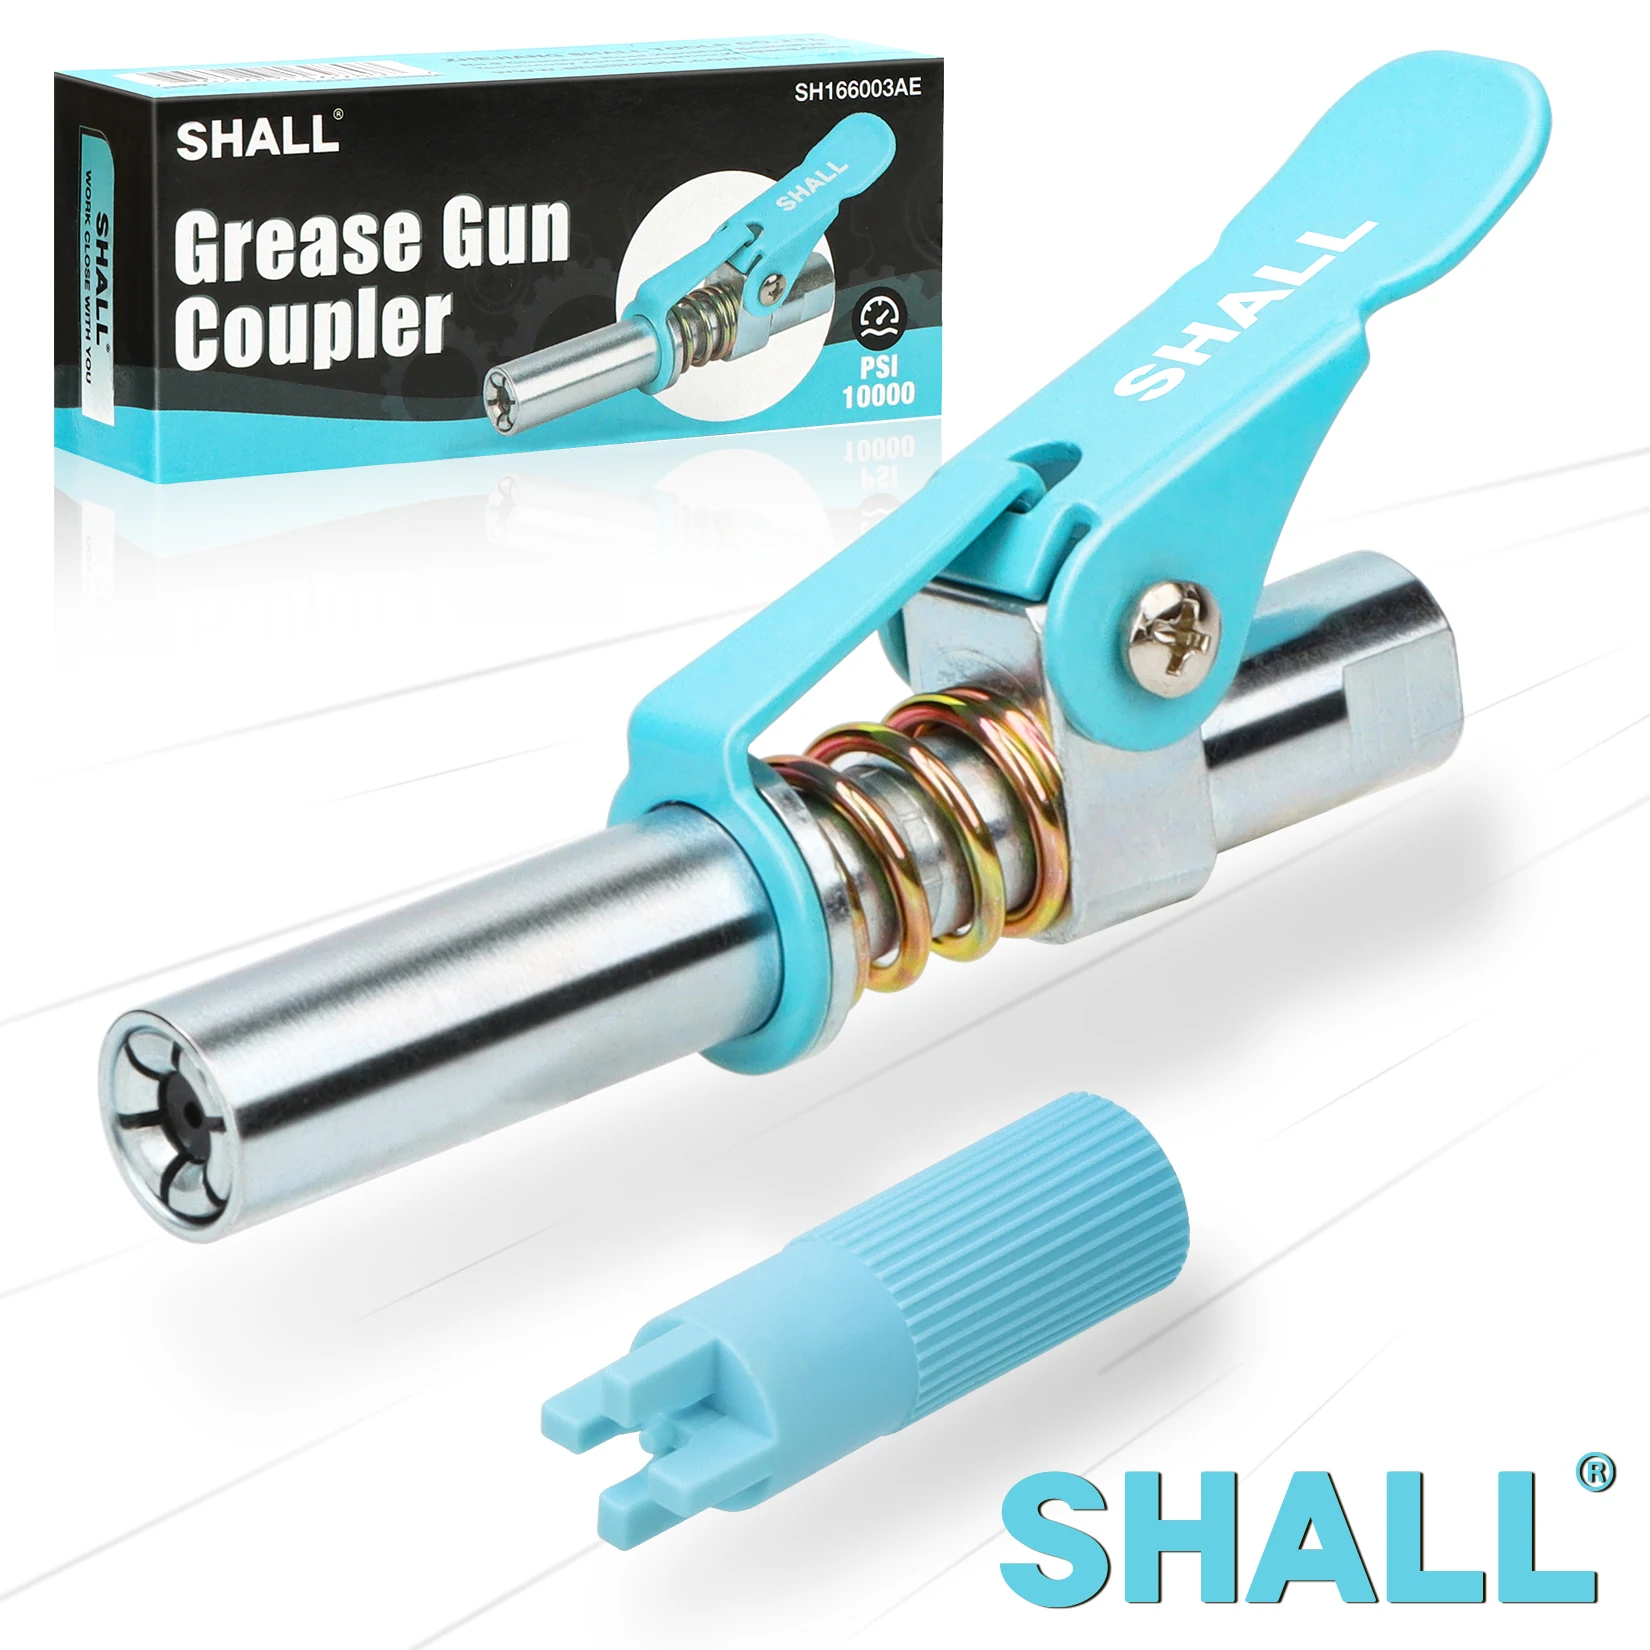 

SHALL Grease Gun Coupler Quick Release & Strong Locking Grease Gun Couplers Fit All Grease Guns 1/8" NPT Grease Fittings